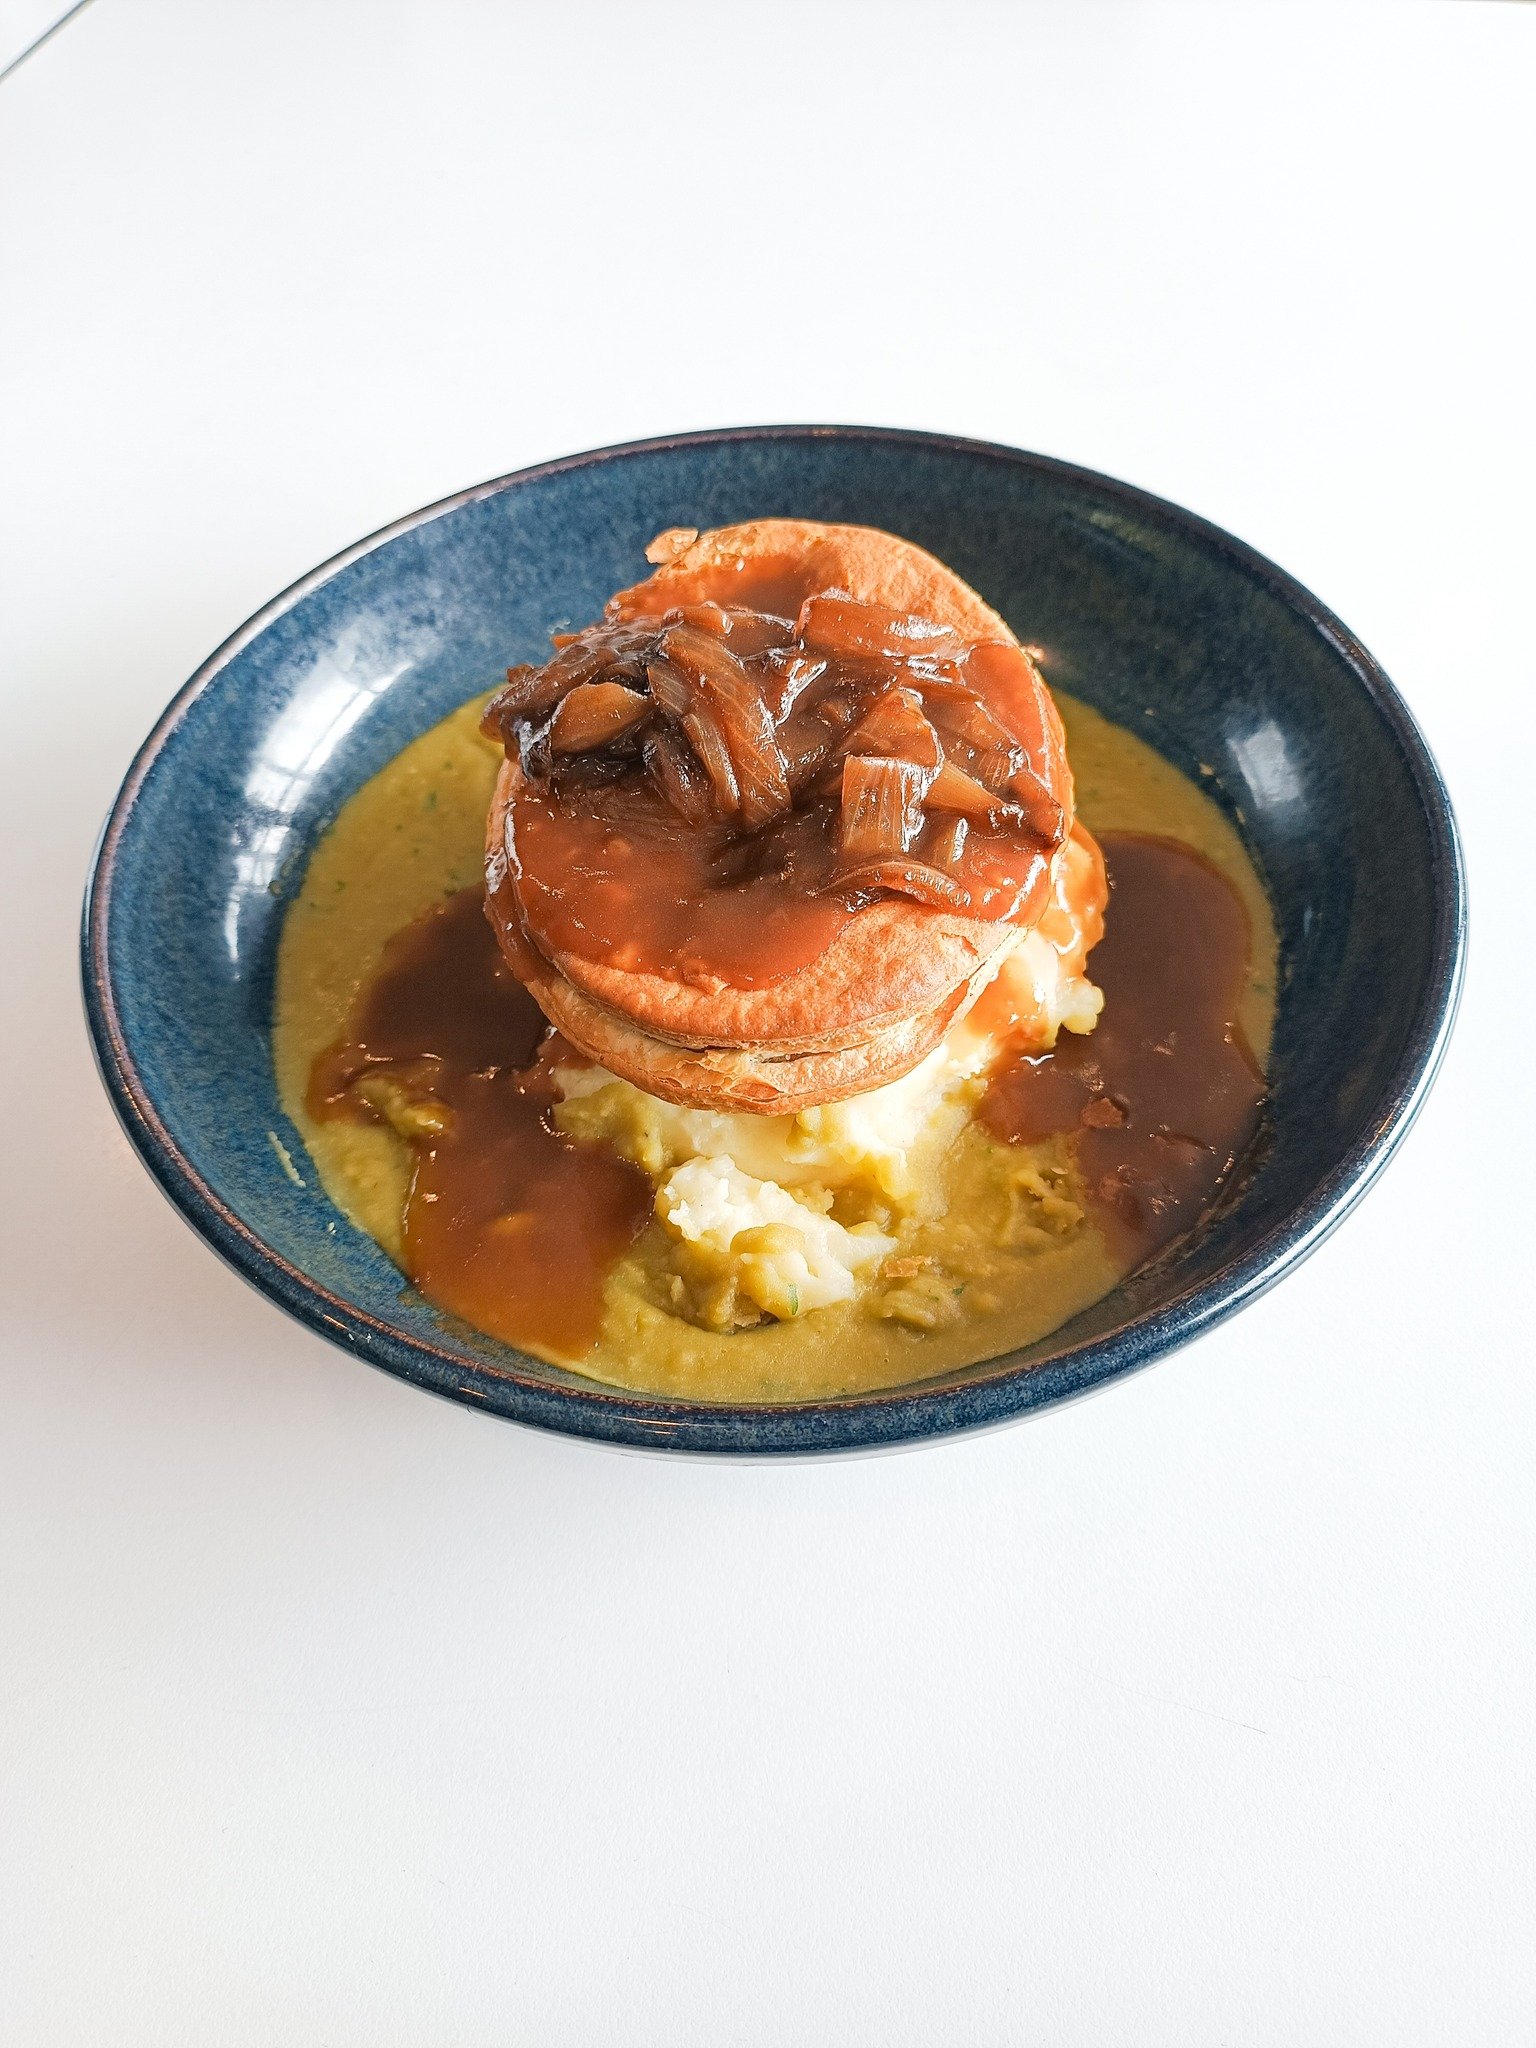 This week's comfort special, hot out of the kitchen. 🔥
 
Indulge in the savoury goodness of our Vili&rsquo;s Golden Beef Pie, served with classic sides of mushy peas, creamy mash potato, caramelised onion, and rich gravy&mdash;all for just $19.50! ?